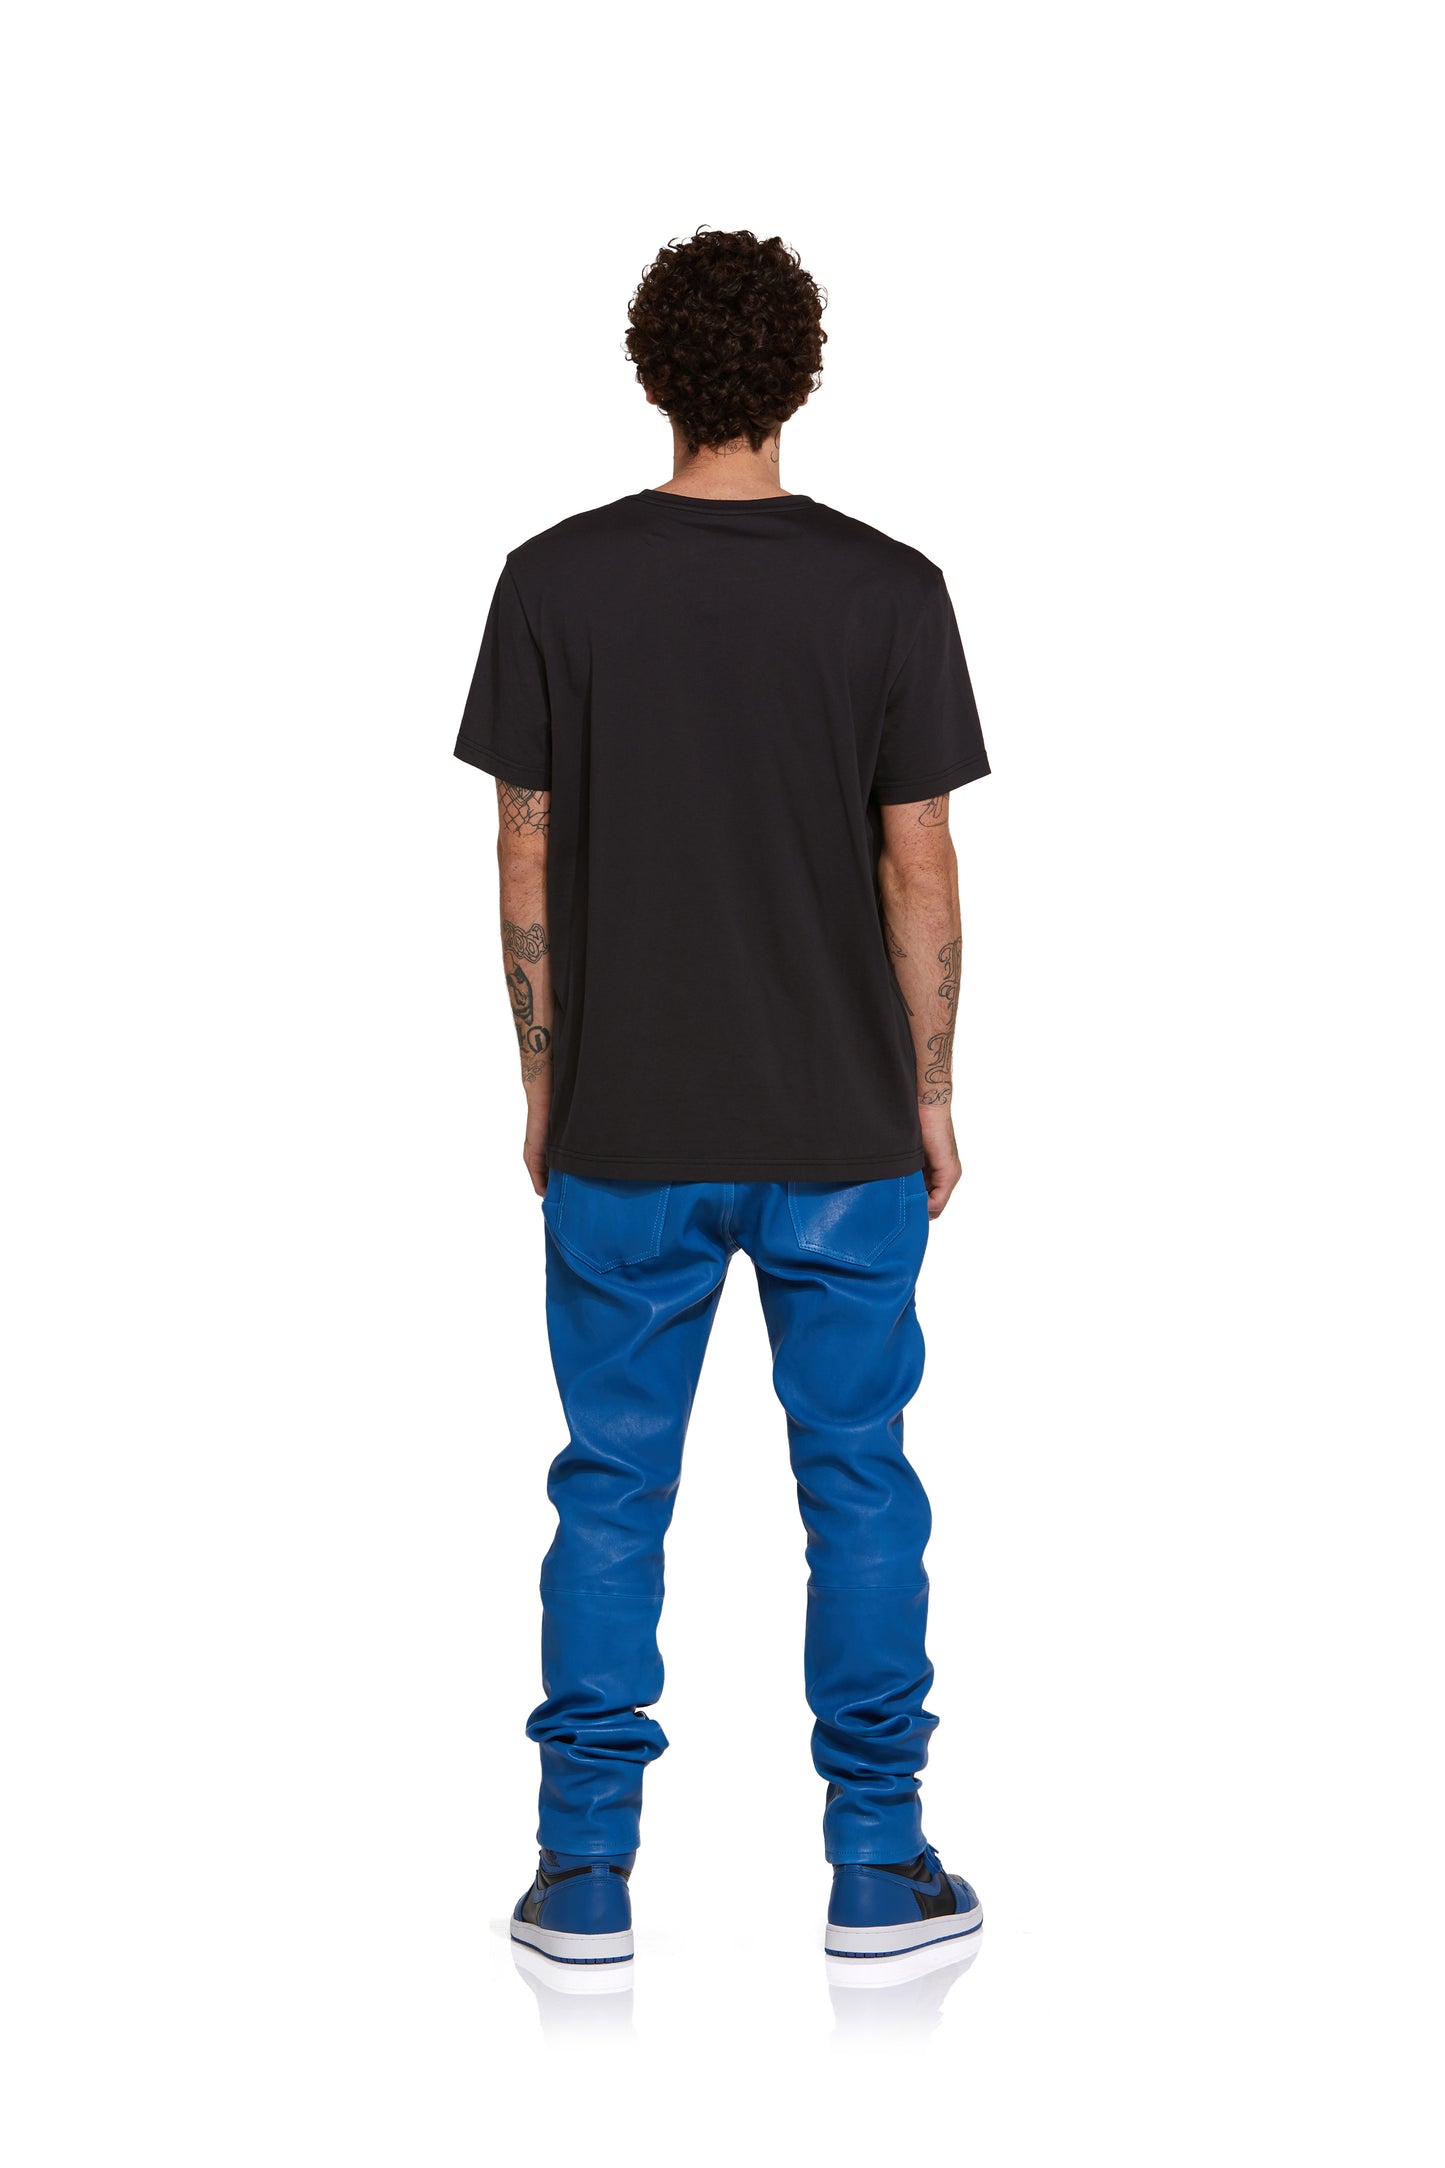 P001 LOW RISE SKINNY PANT - Stretch Leather Galaxy Blue